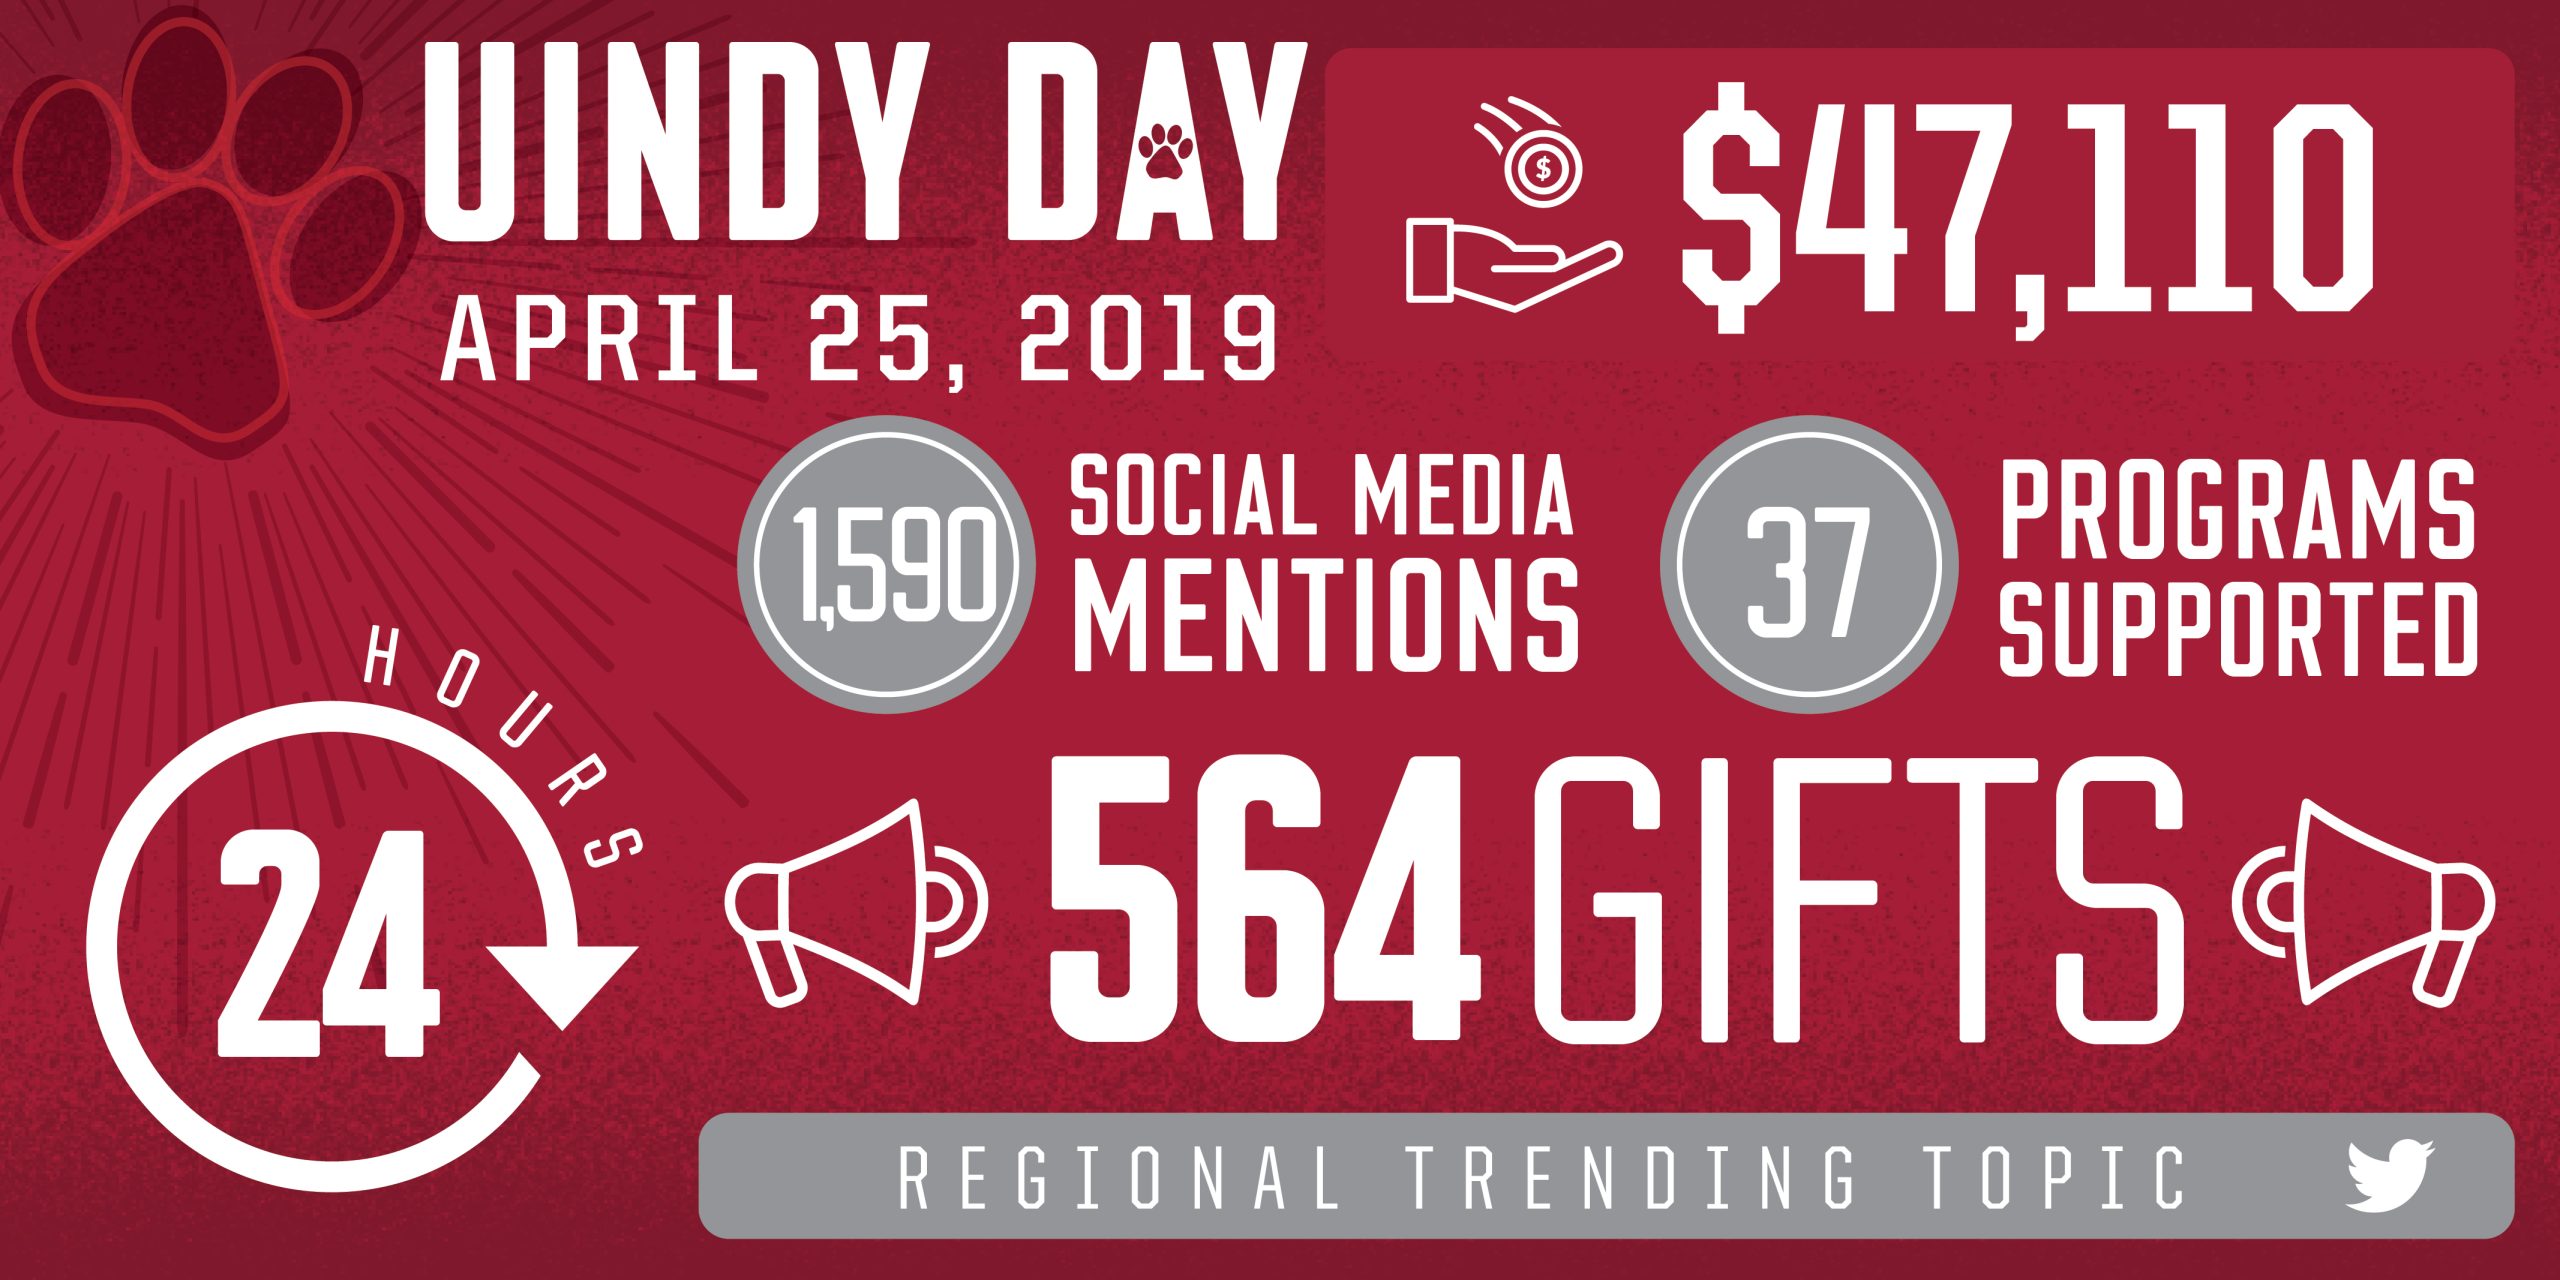 uindy day results graphic